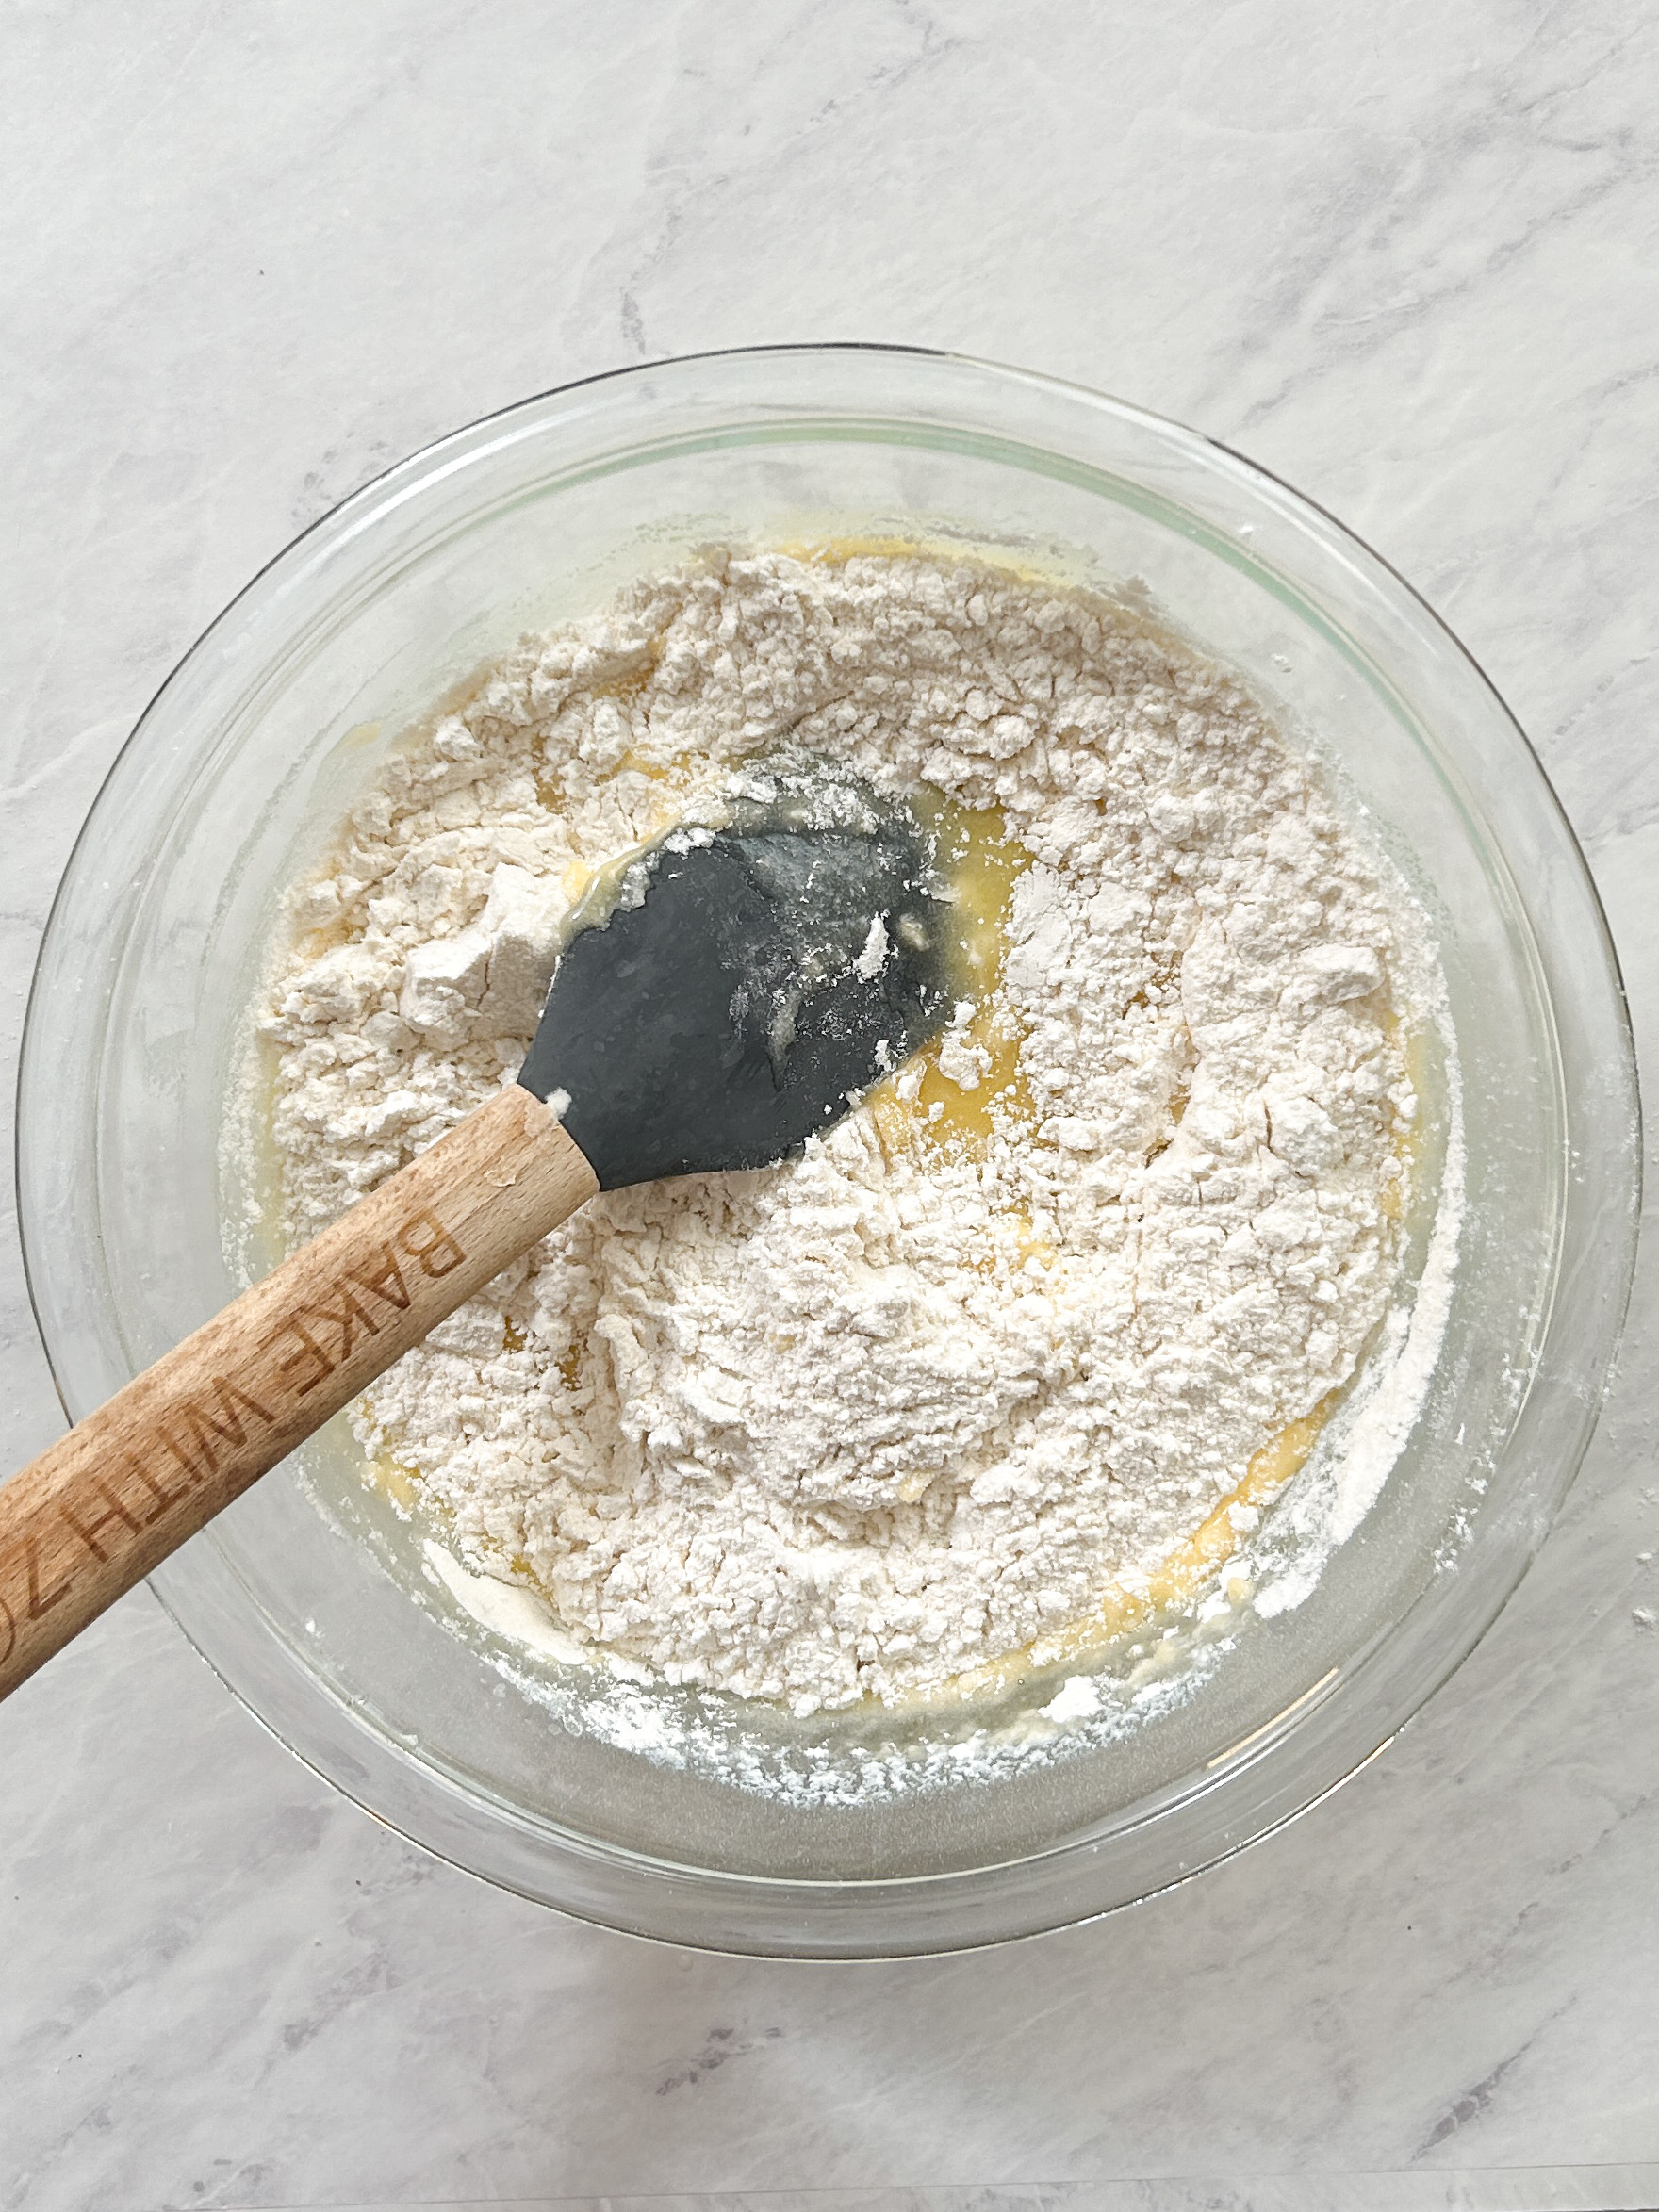 rubber spatula folding dry ingredients into cake batter